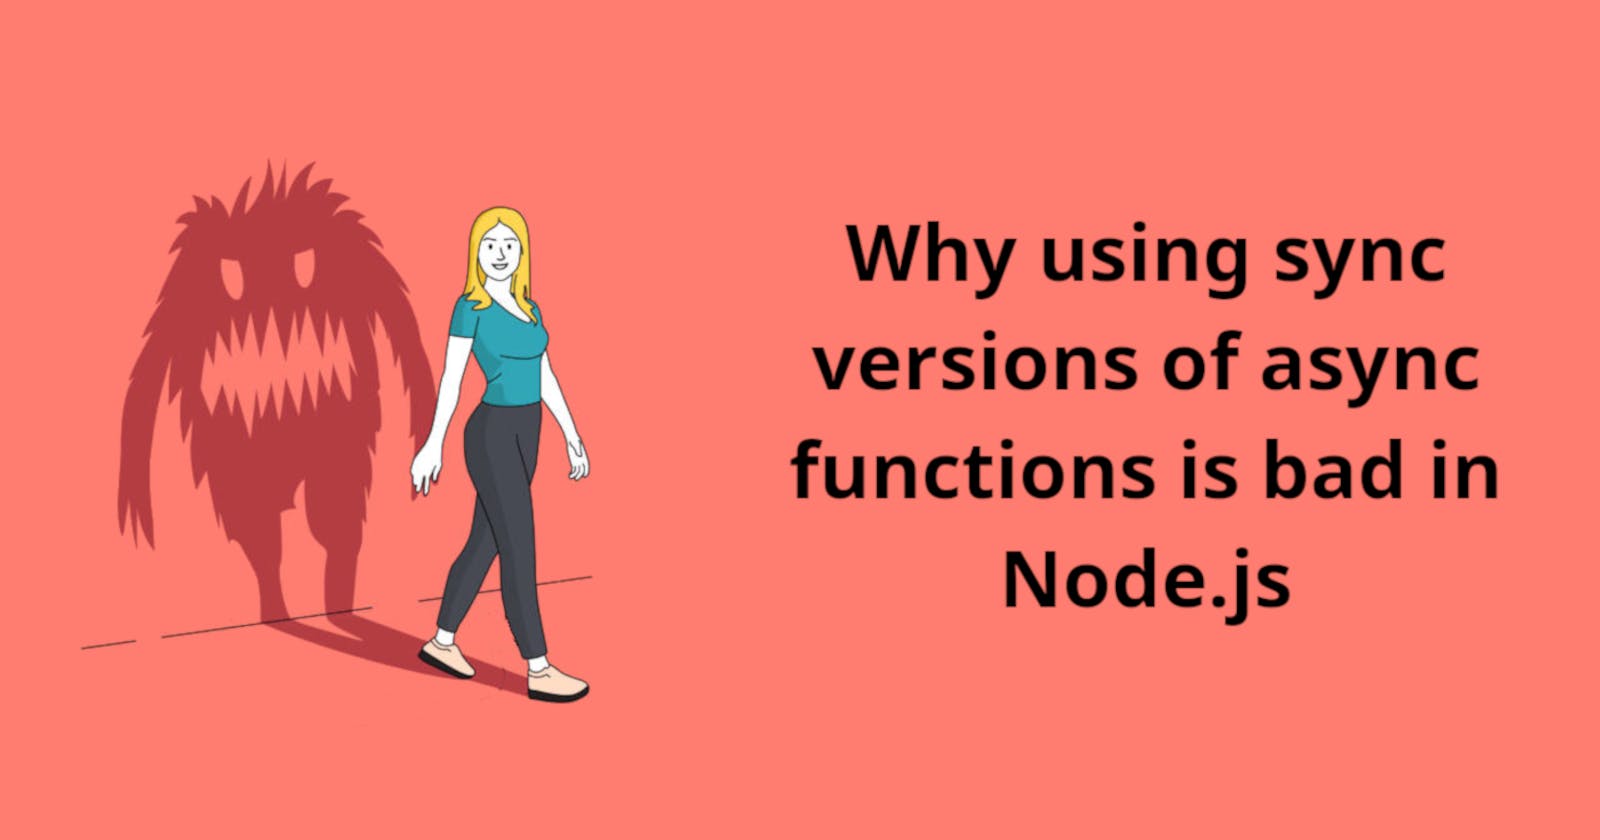 [Node.js] Why using sync versions of async functions is bad.